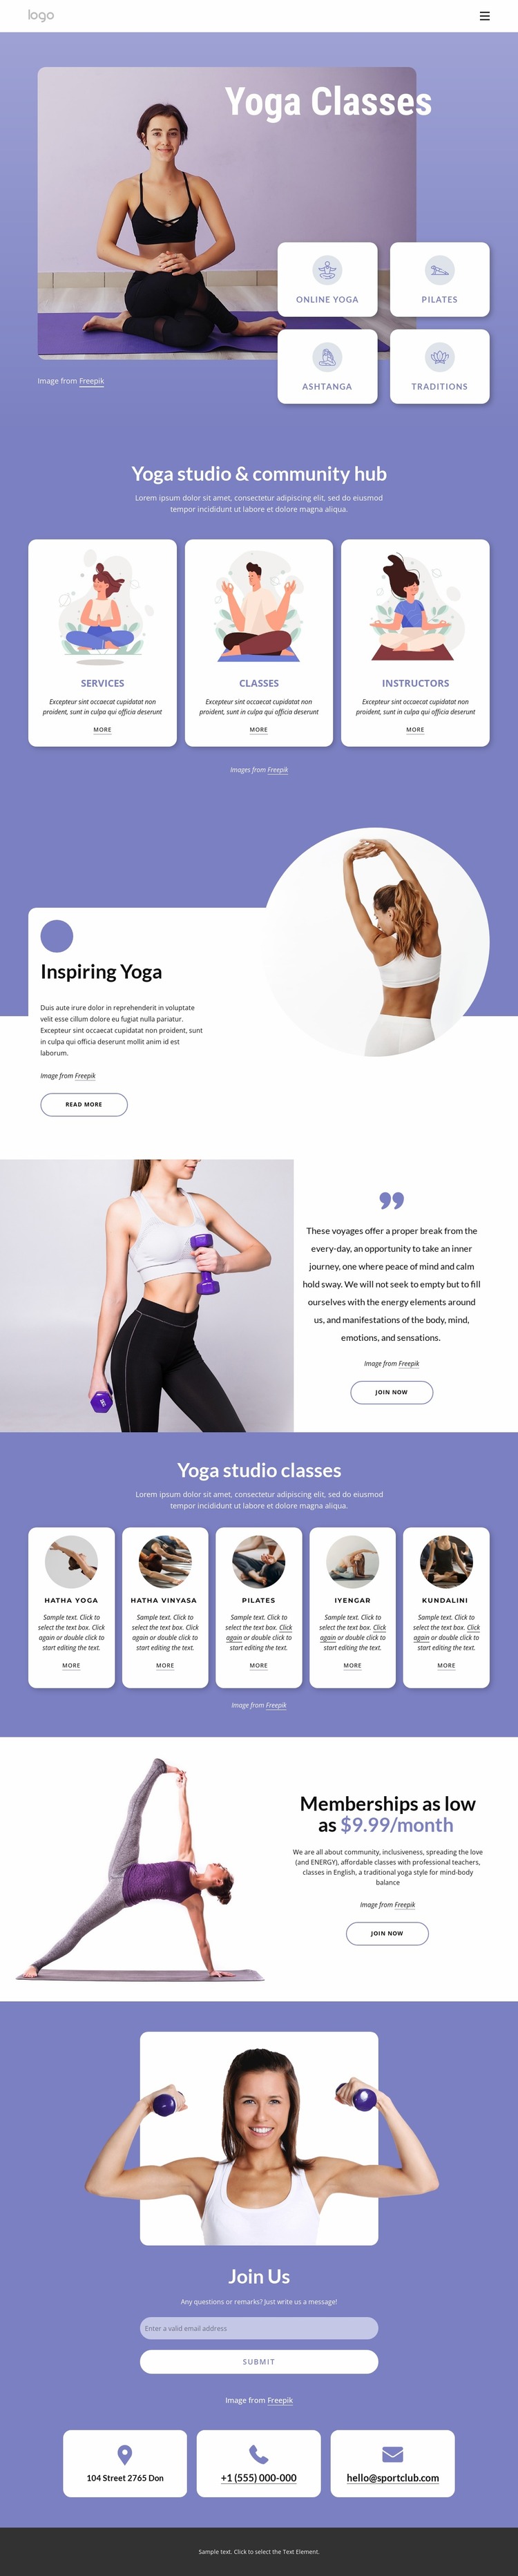 Join our yoga classes Website Mockup